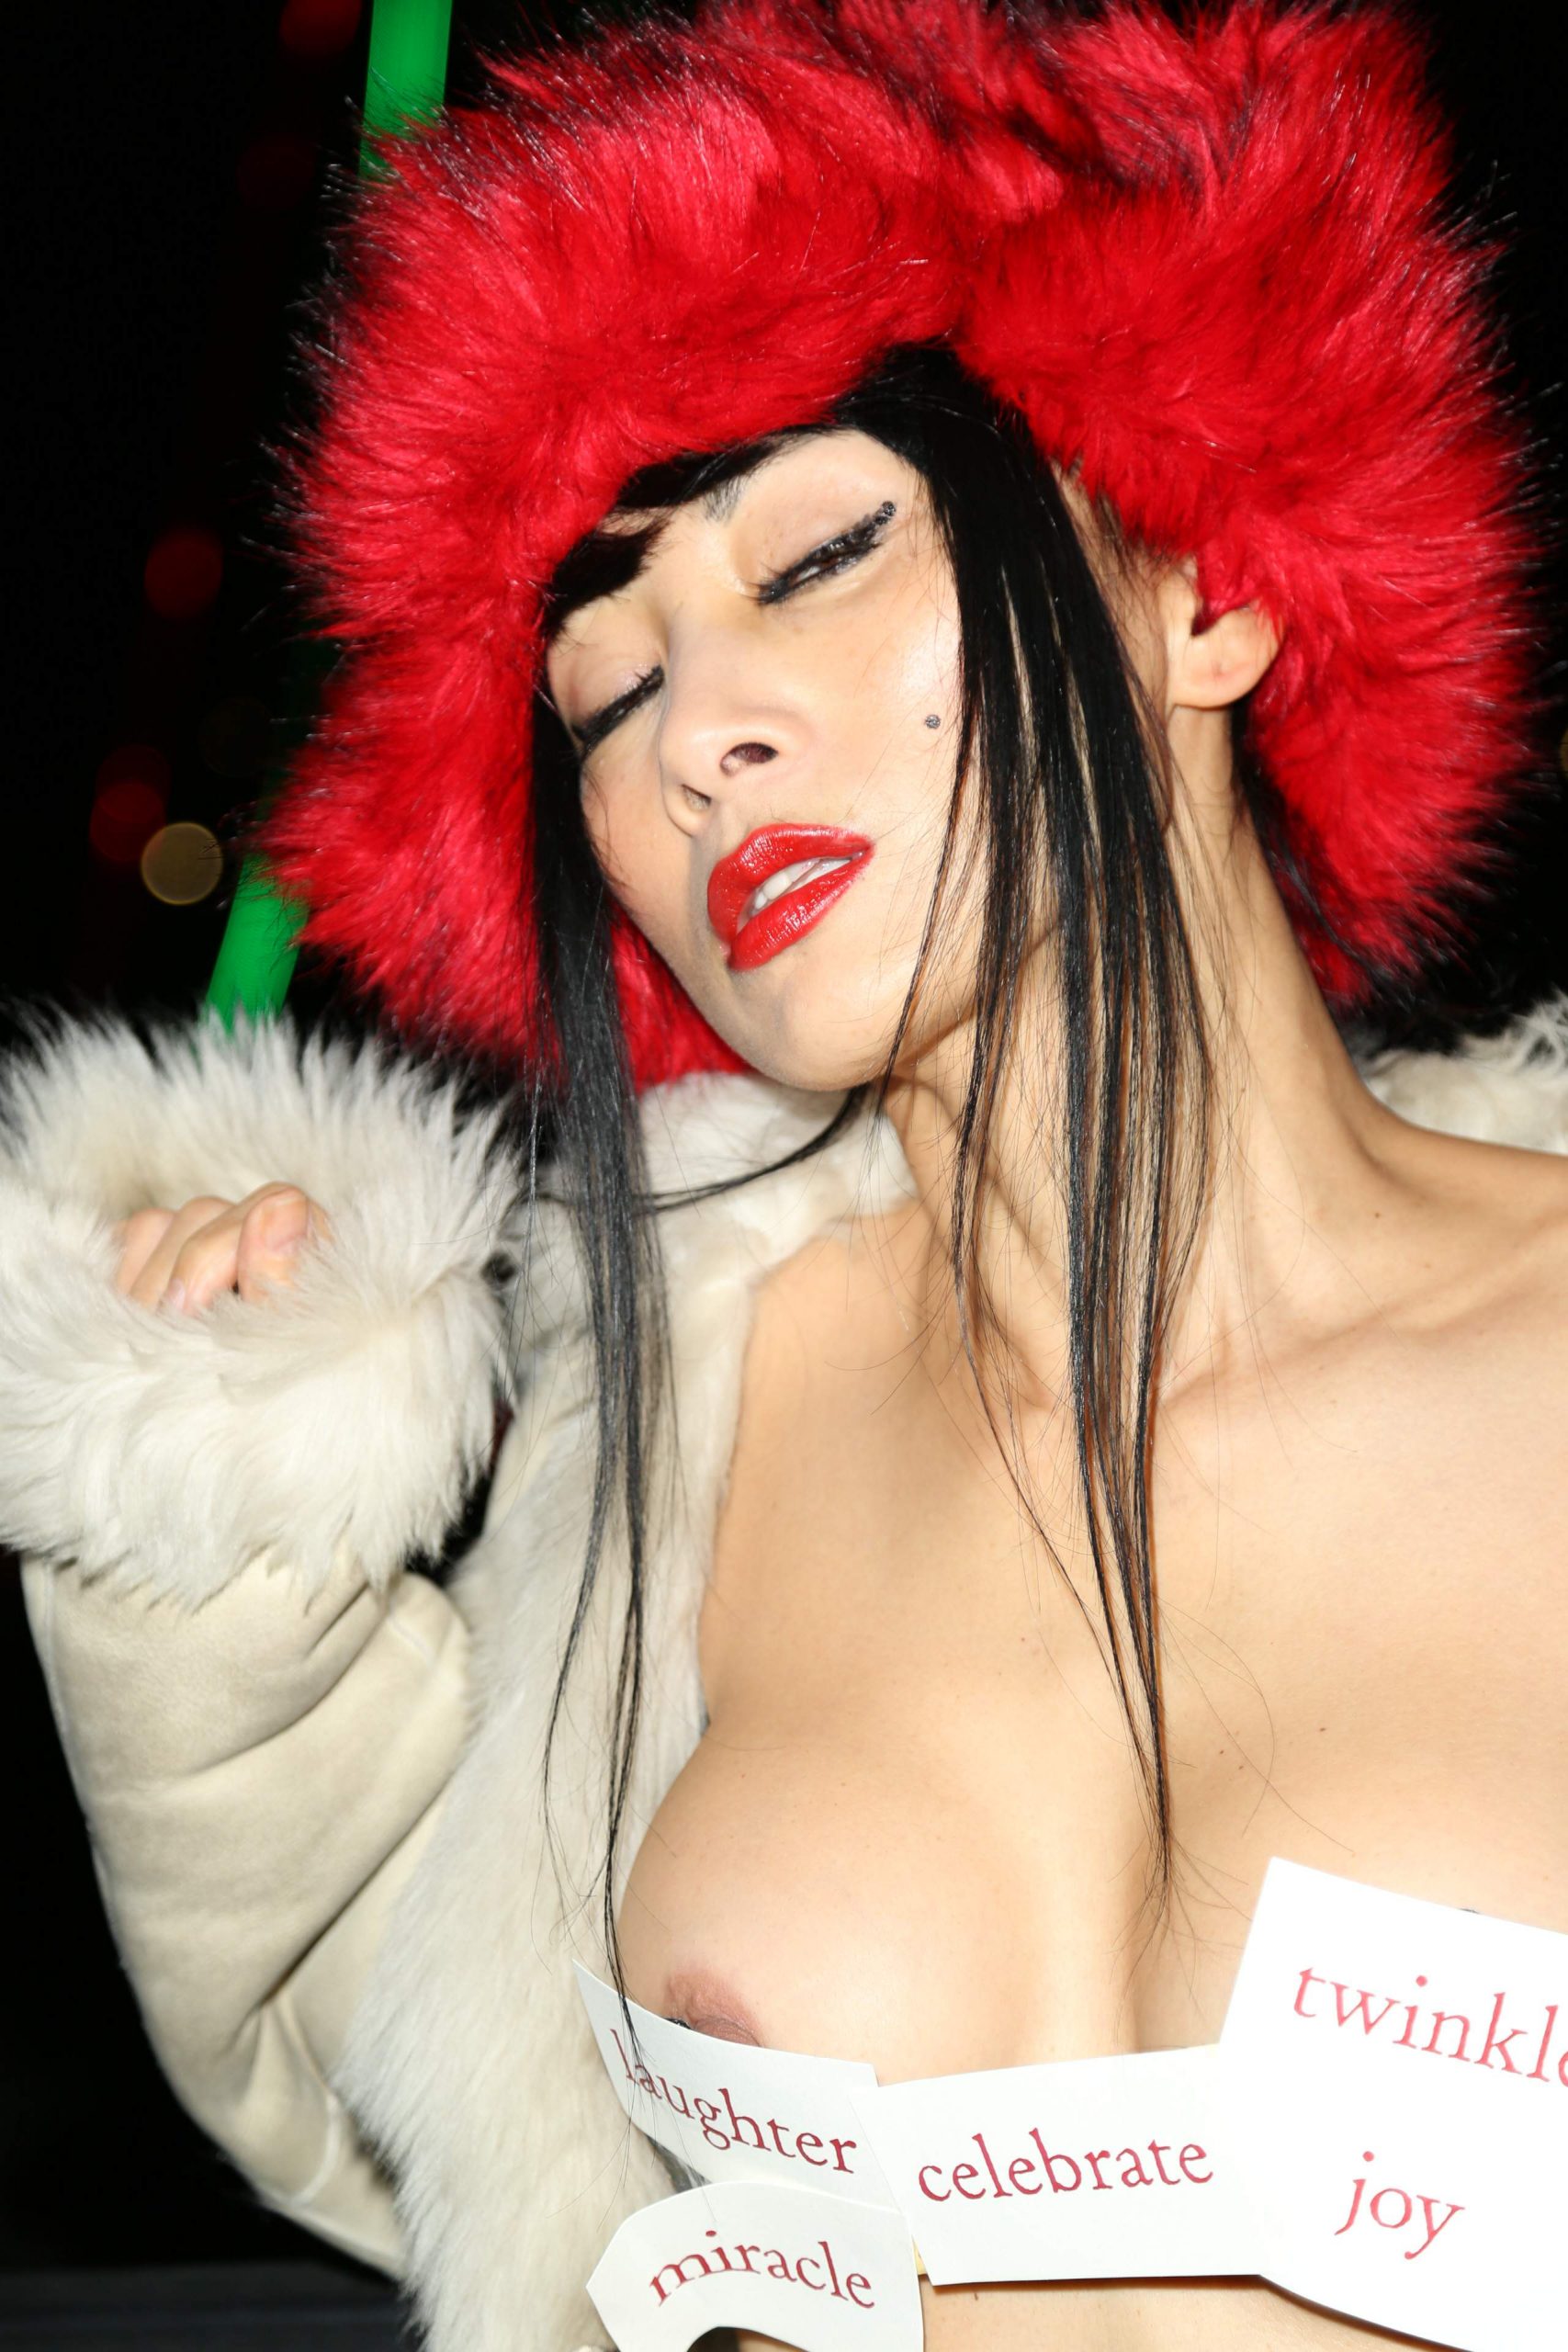 Bai Ling Accidentally Shows Her Suckable Nipple in Public (#NipSlip)